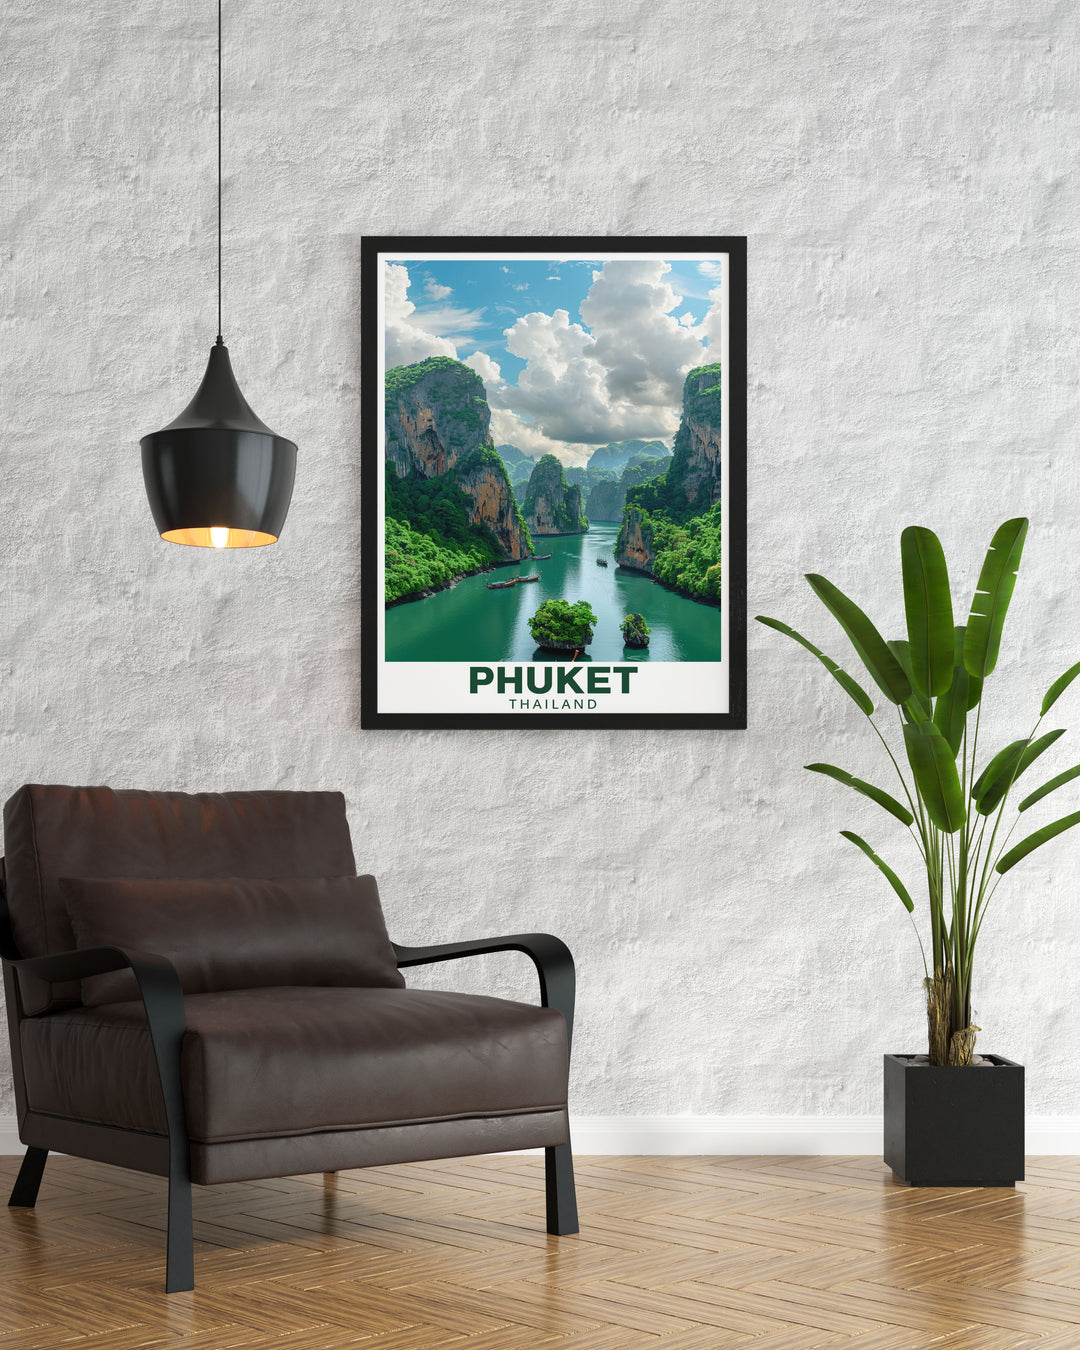 Phang Nga Bay travel poster featuring detailed illustrations of the famous Thai bay perfect for those who want to relive their travels or dream of visiting Phang Nga Bay a great addition to any wall art collection